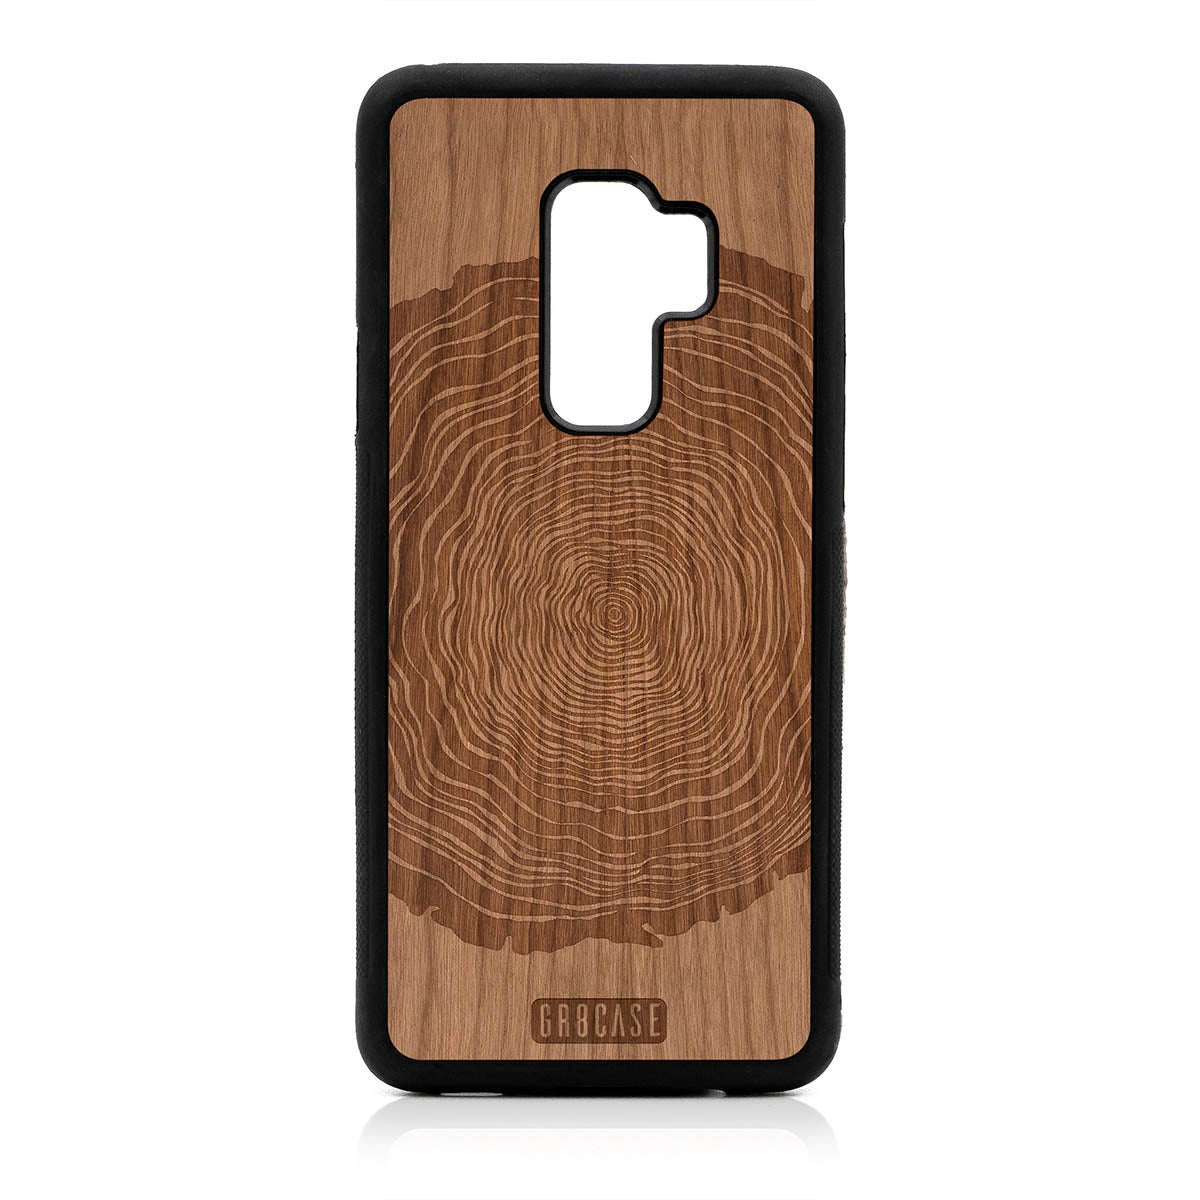 Tree Rings Design Wood Case For Samsung Galaxy S9 Plus